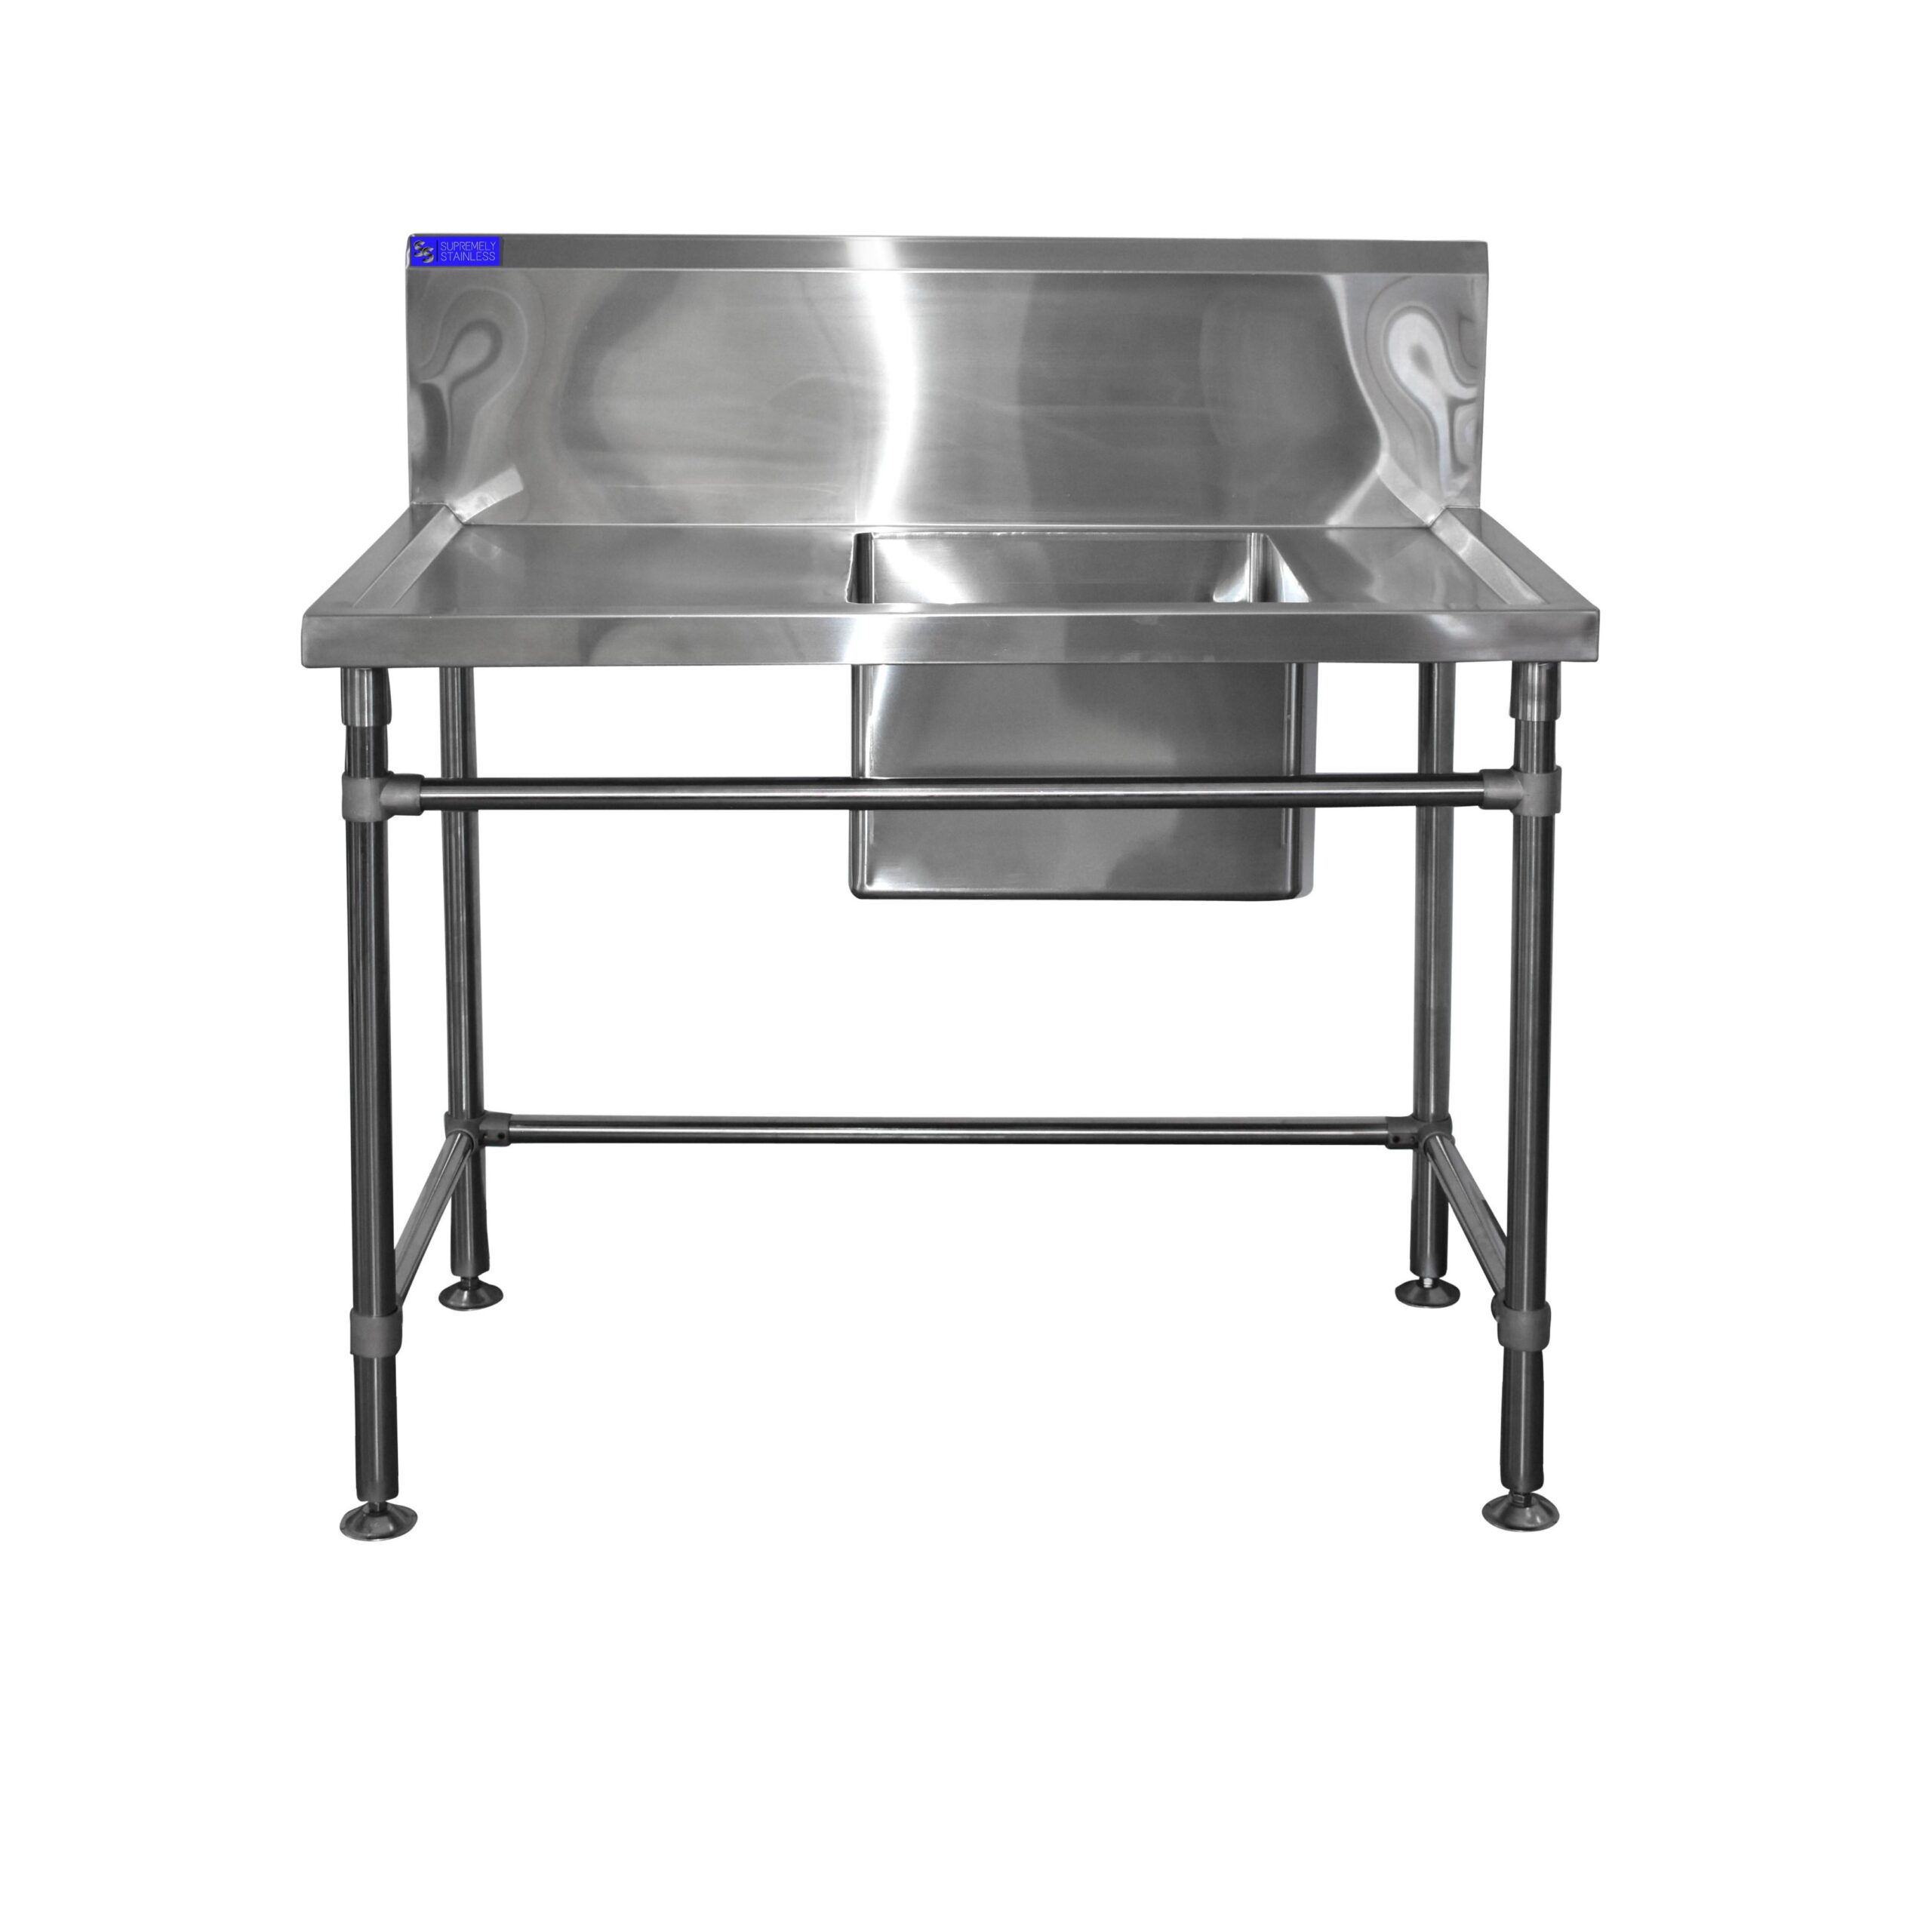 Stainless Steel Sink  700mm x 1500mm Single Bowl